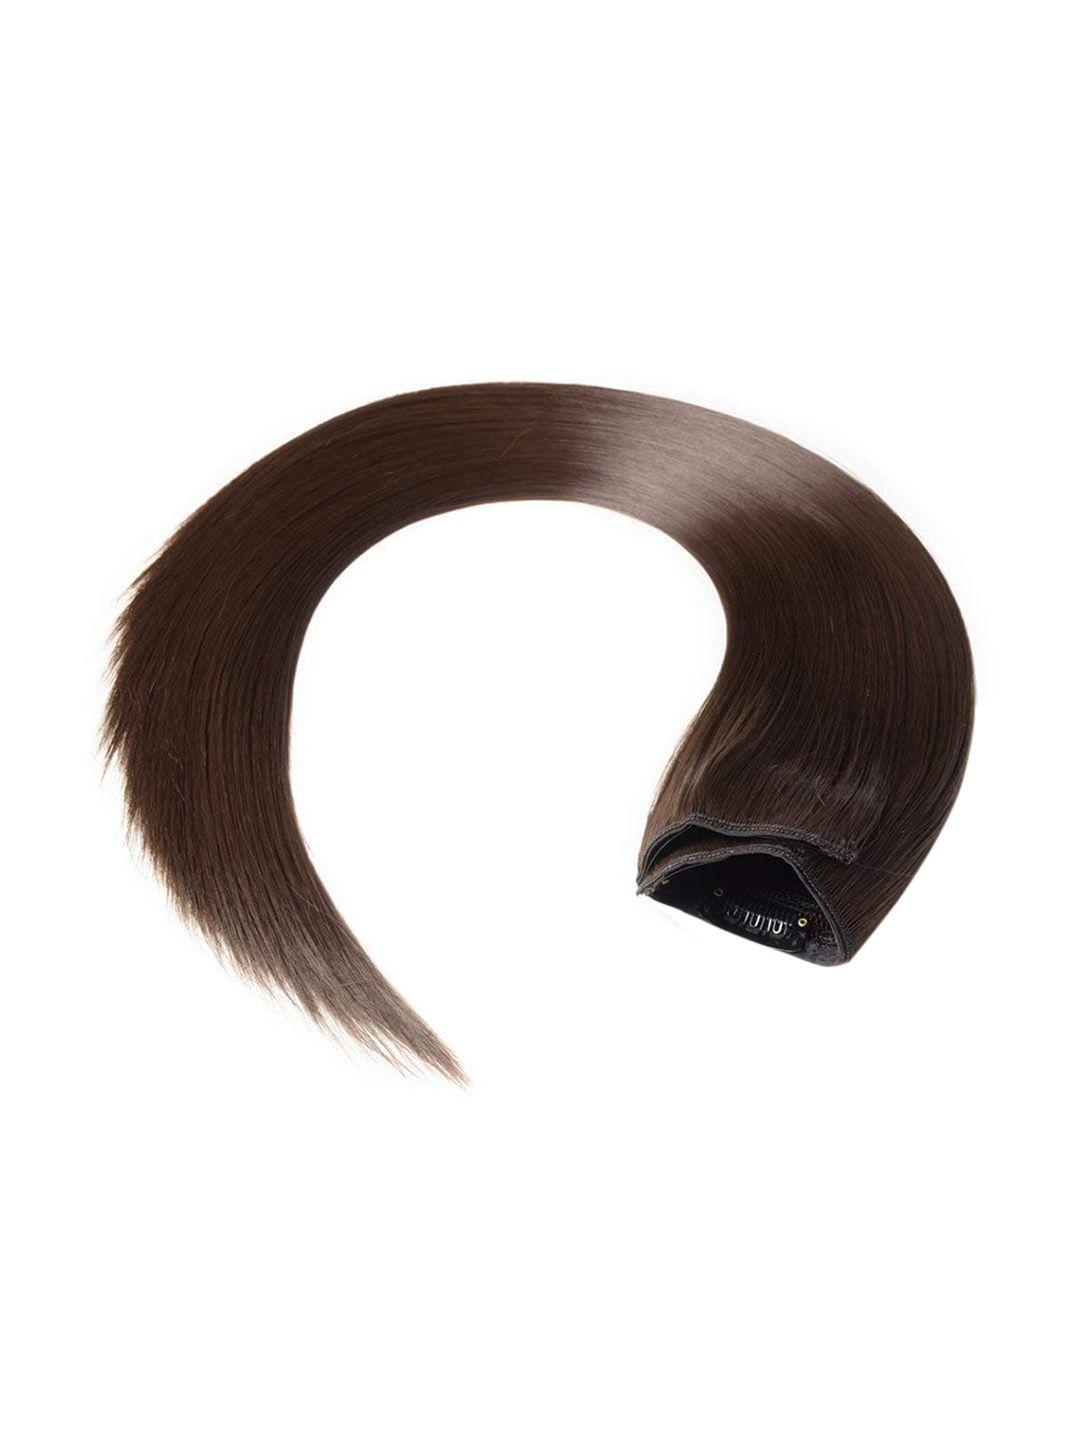 chronex brown 5 clips based synthetic straight hair extension